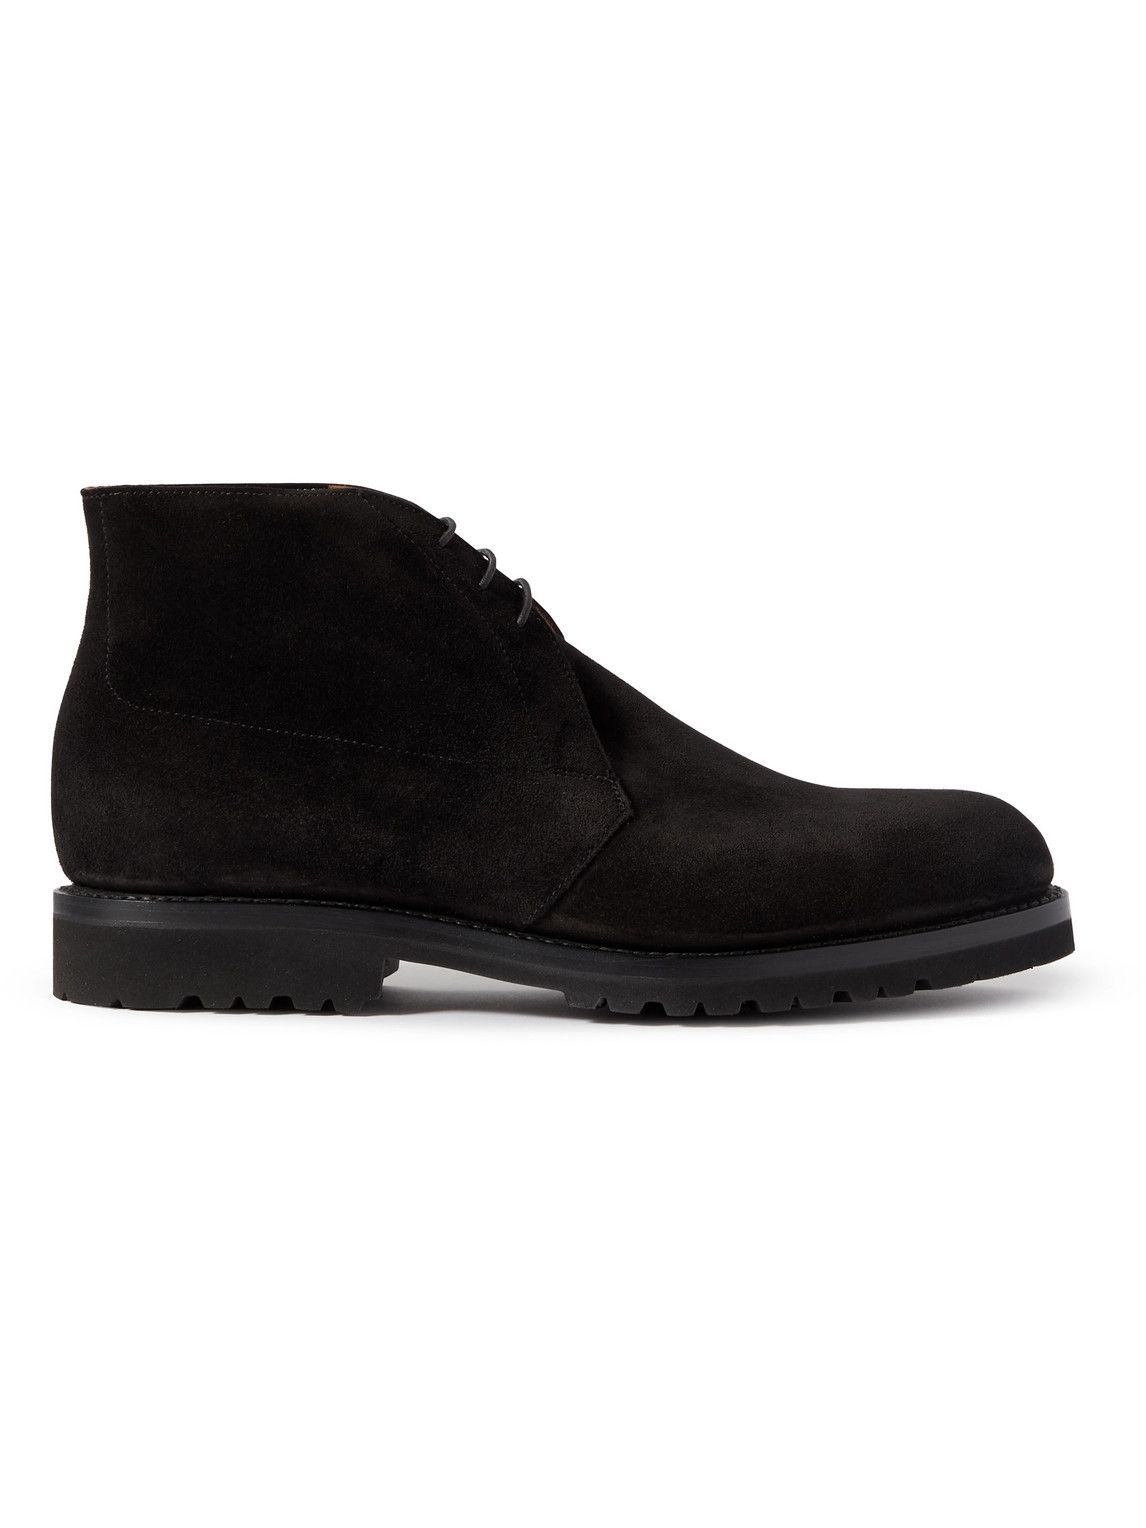 George Cleverley - Nathan Suede Chukka Boots - Black George Cleverley